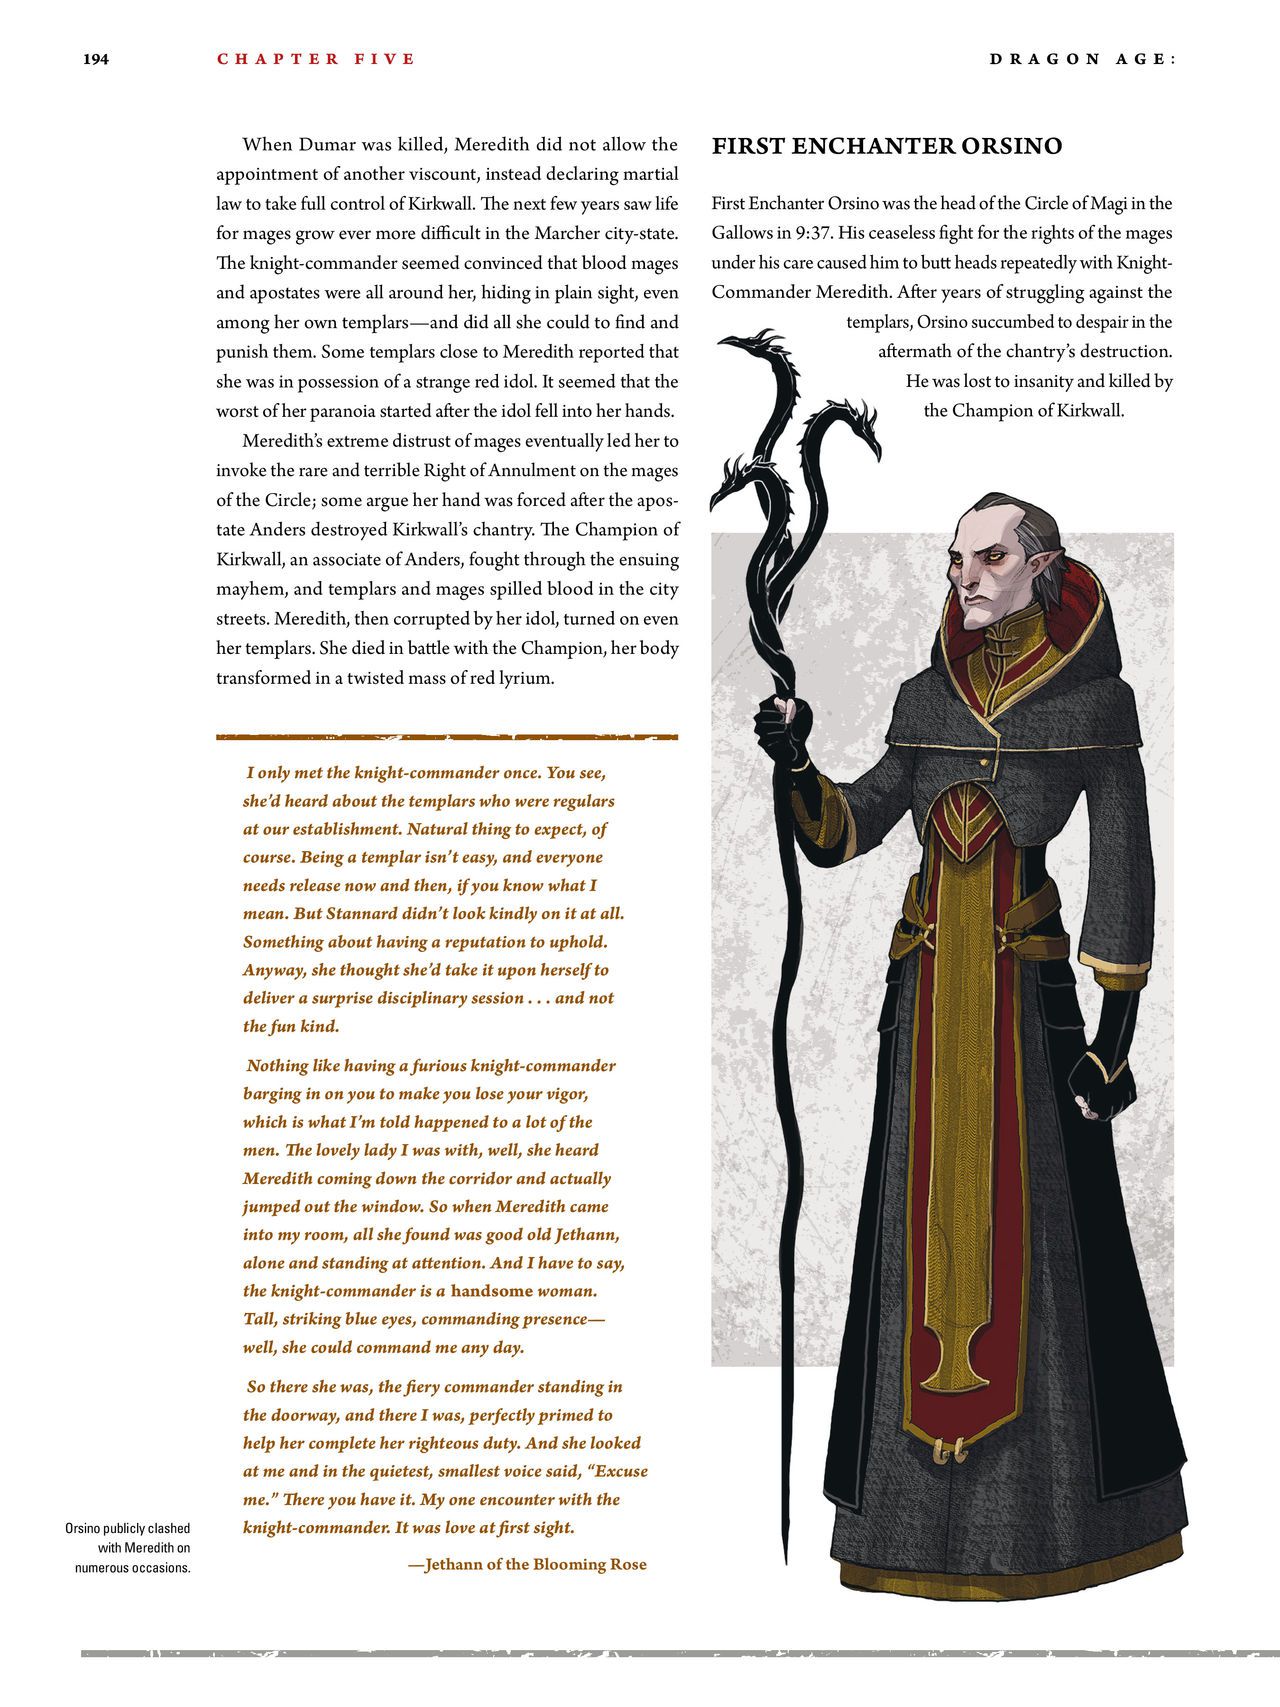 Dragon Age - The World of Thedas v02 189